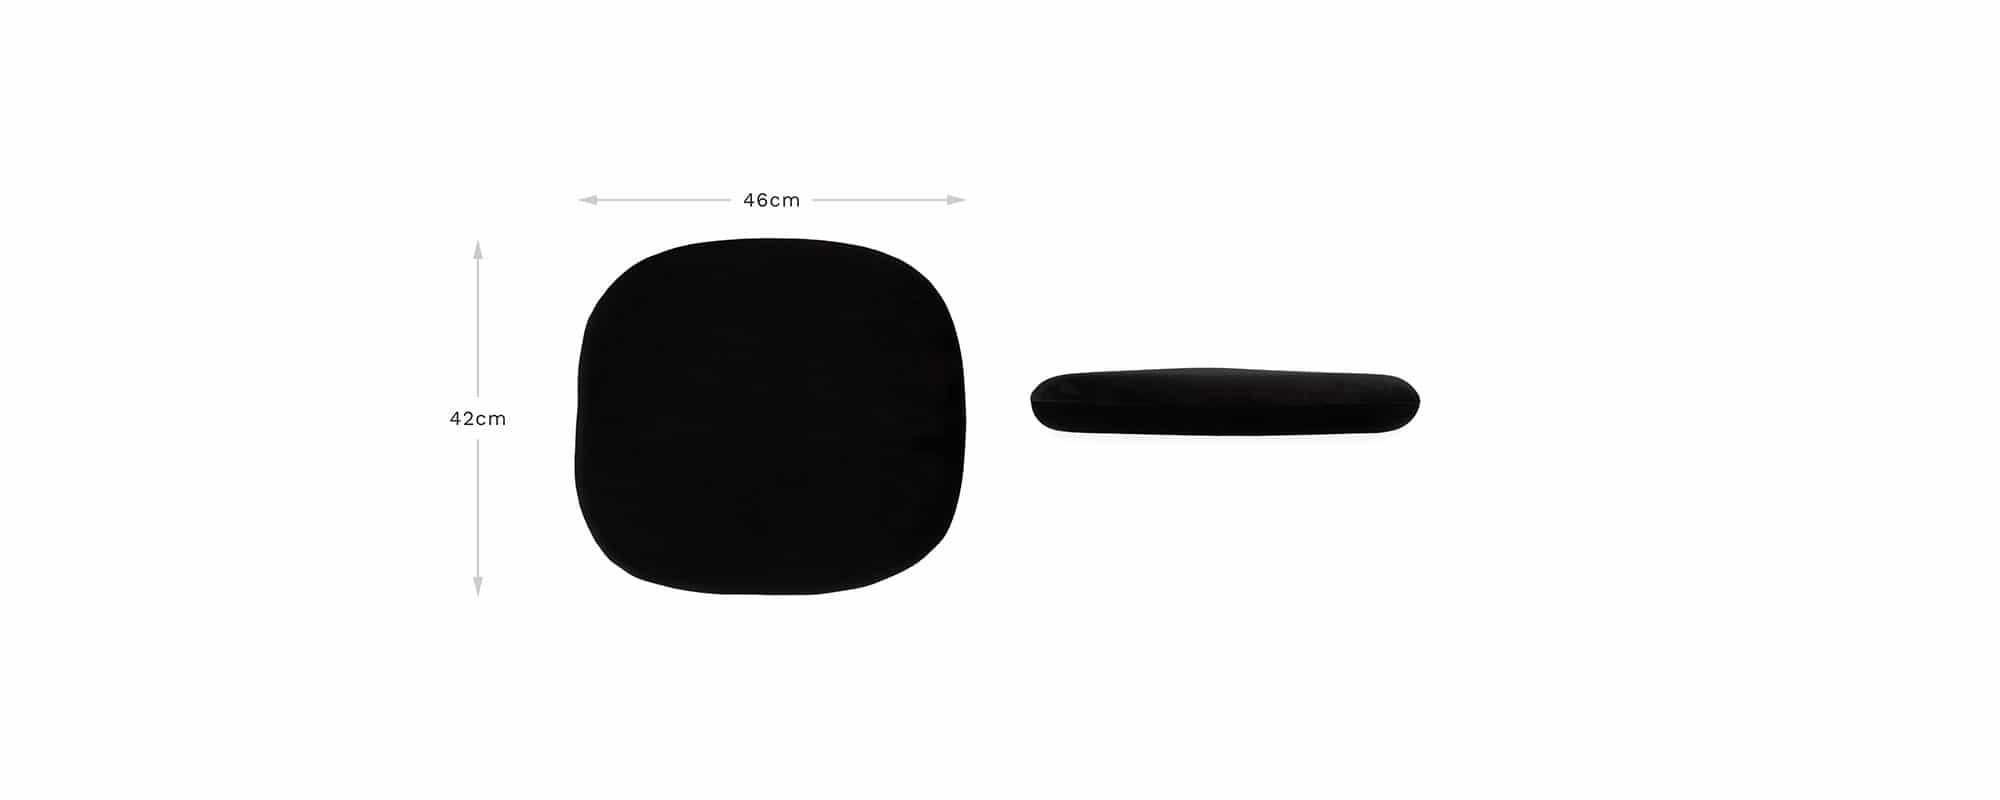 A simple top down and profile view of the Saarinen Tulip Side Chair cushion, with arrows and written dimensions for all measurements given